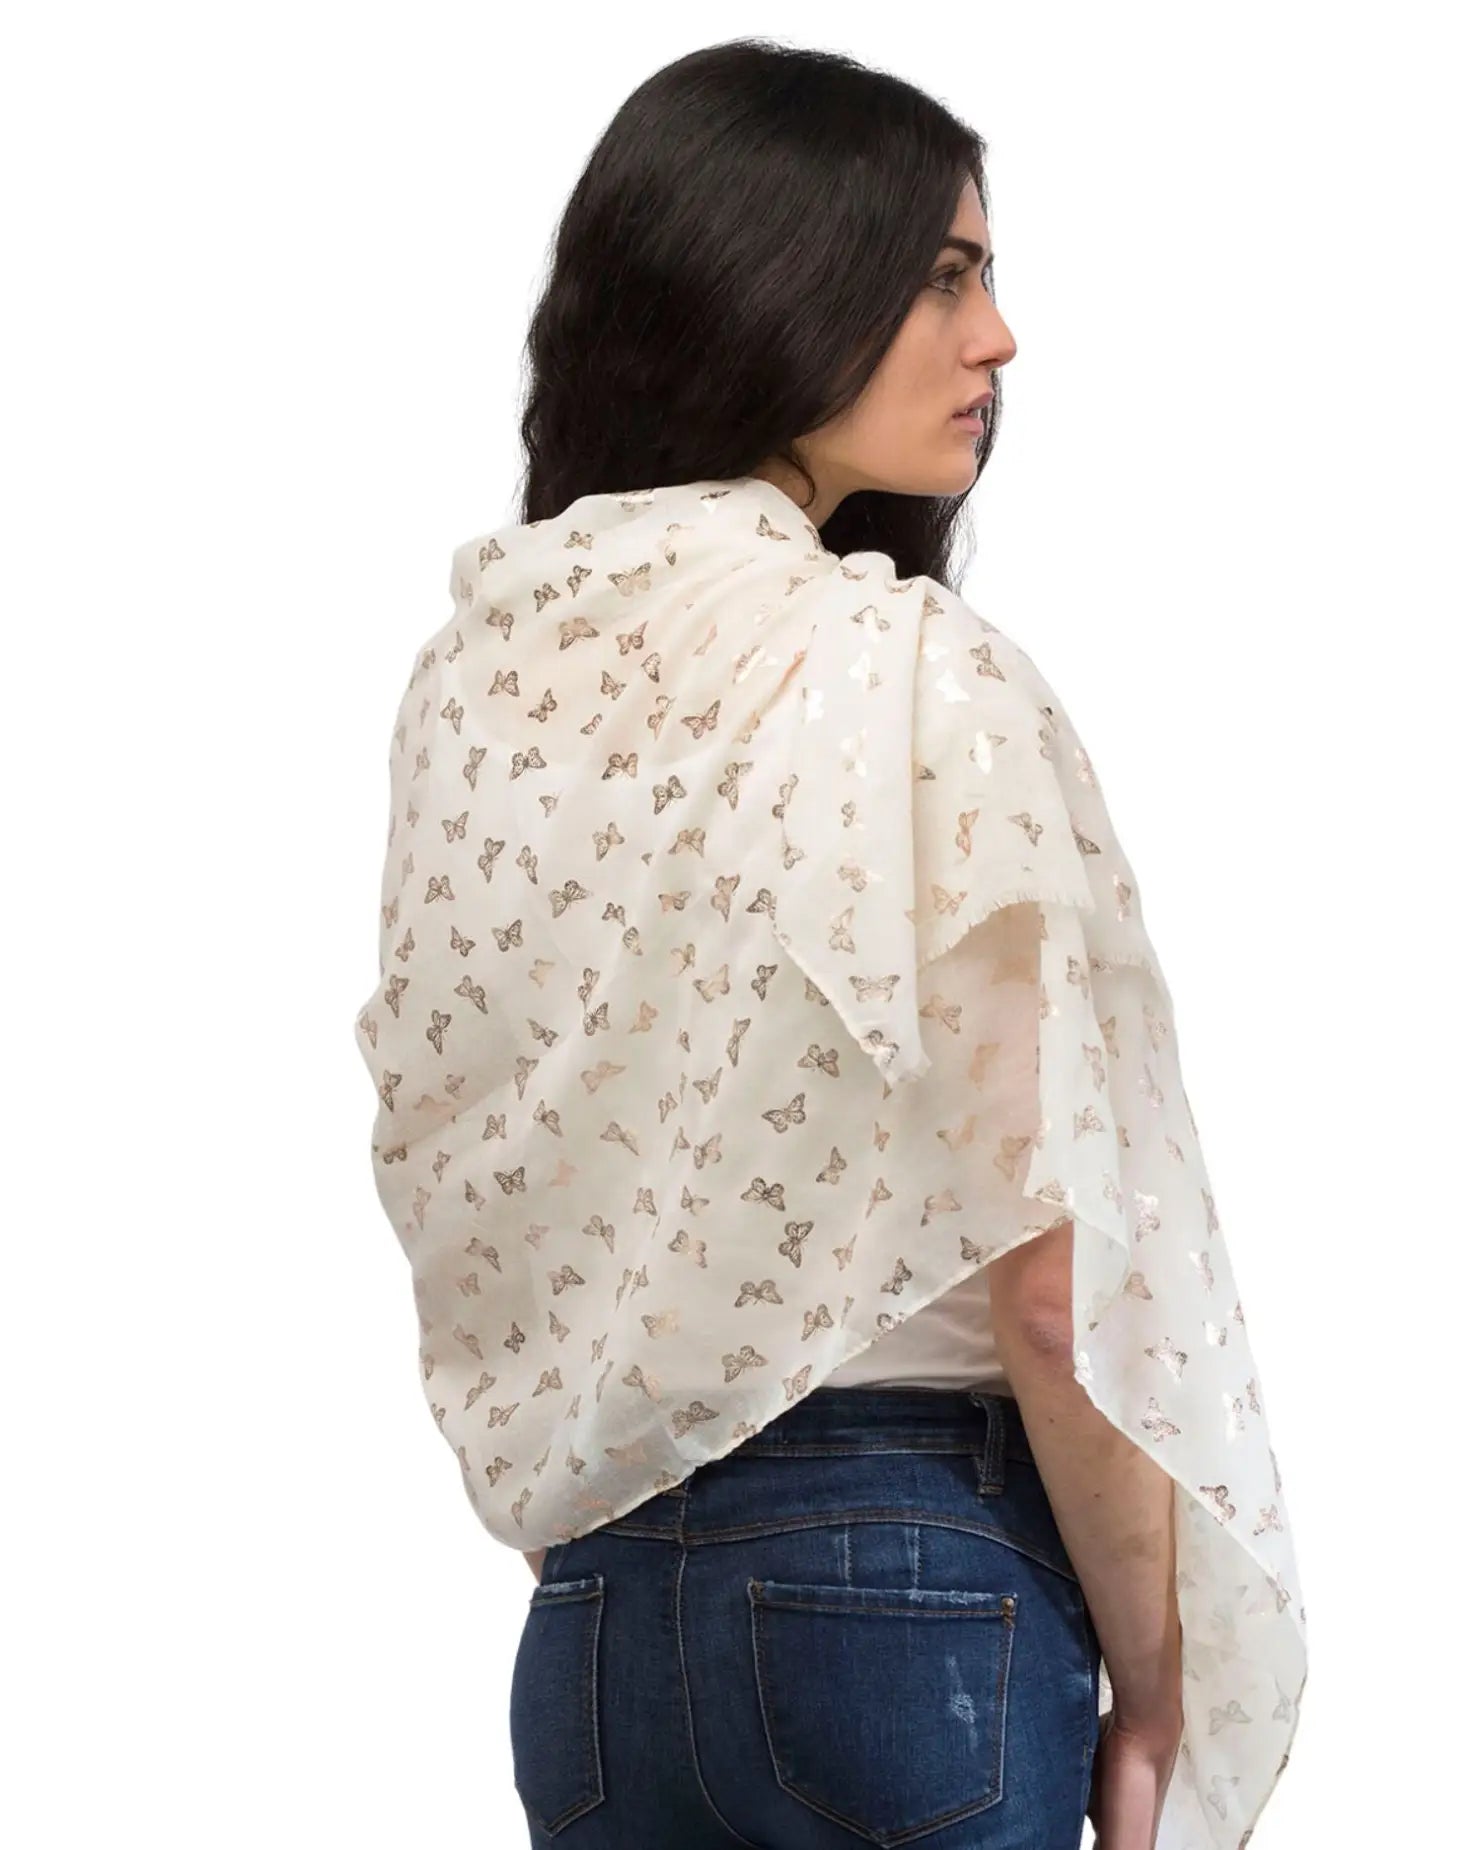 Woman wearing white blouse with floral pattern, Butterfly Print Silver Foil Oversized Scarf